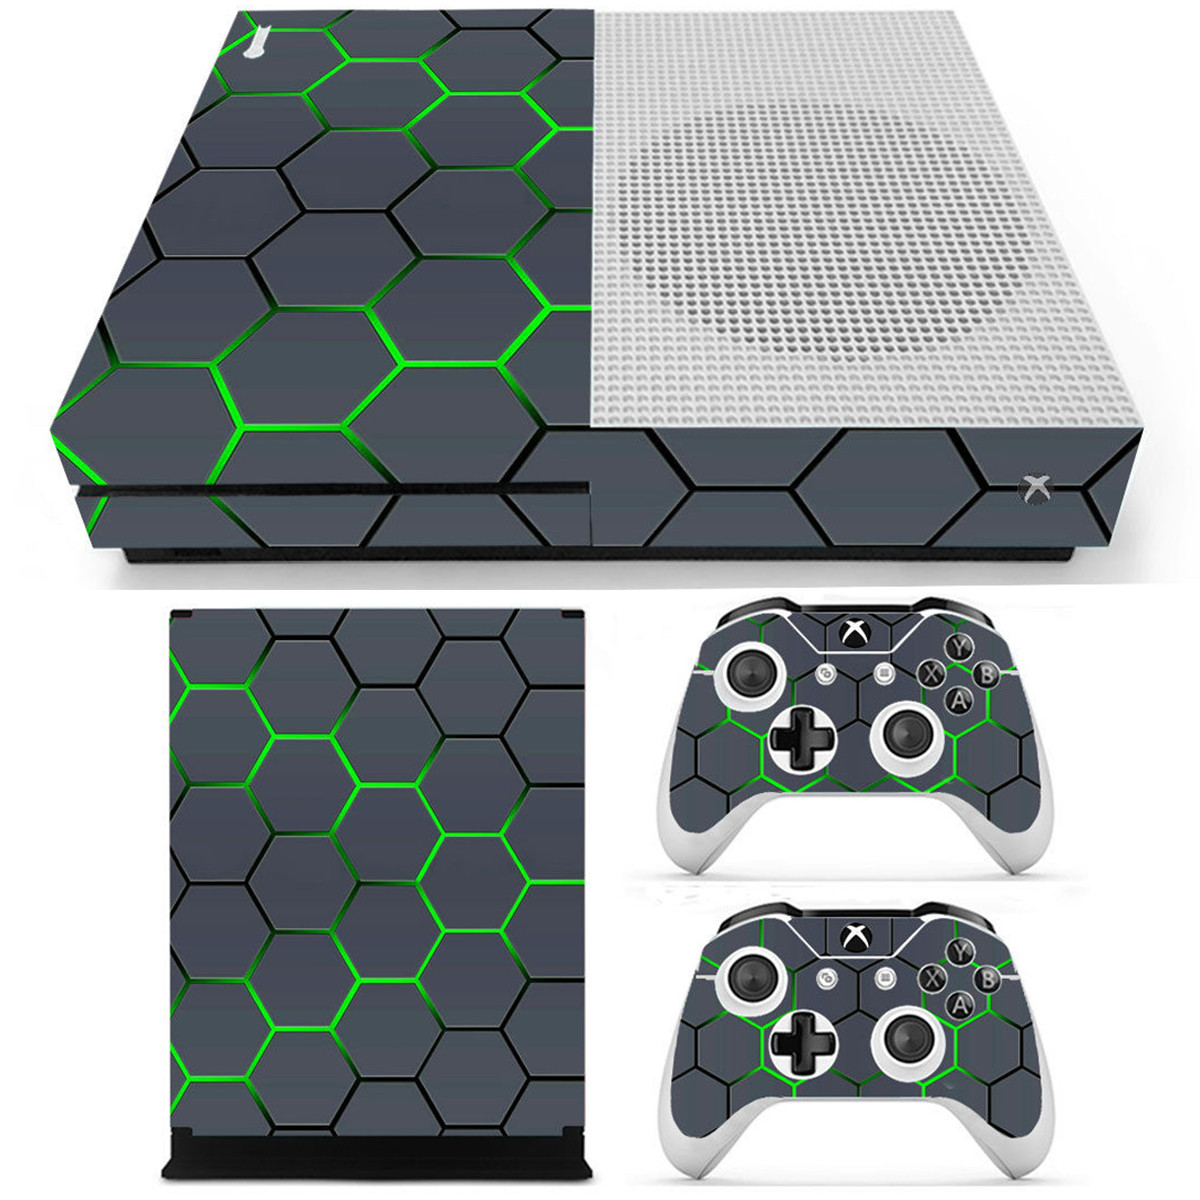 Green Grid Vinyl Decal Skin Stickers Cover for Xbox One S Game Console&2 Controllers 6